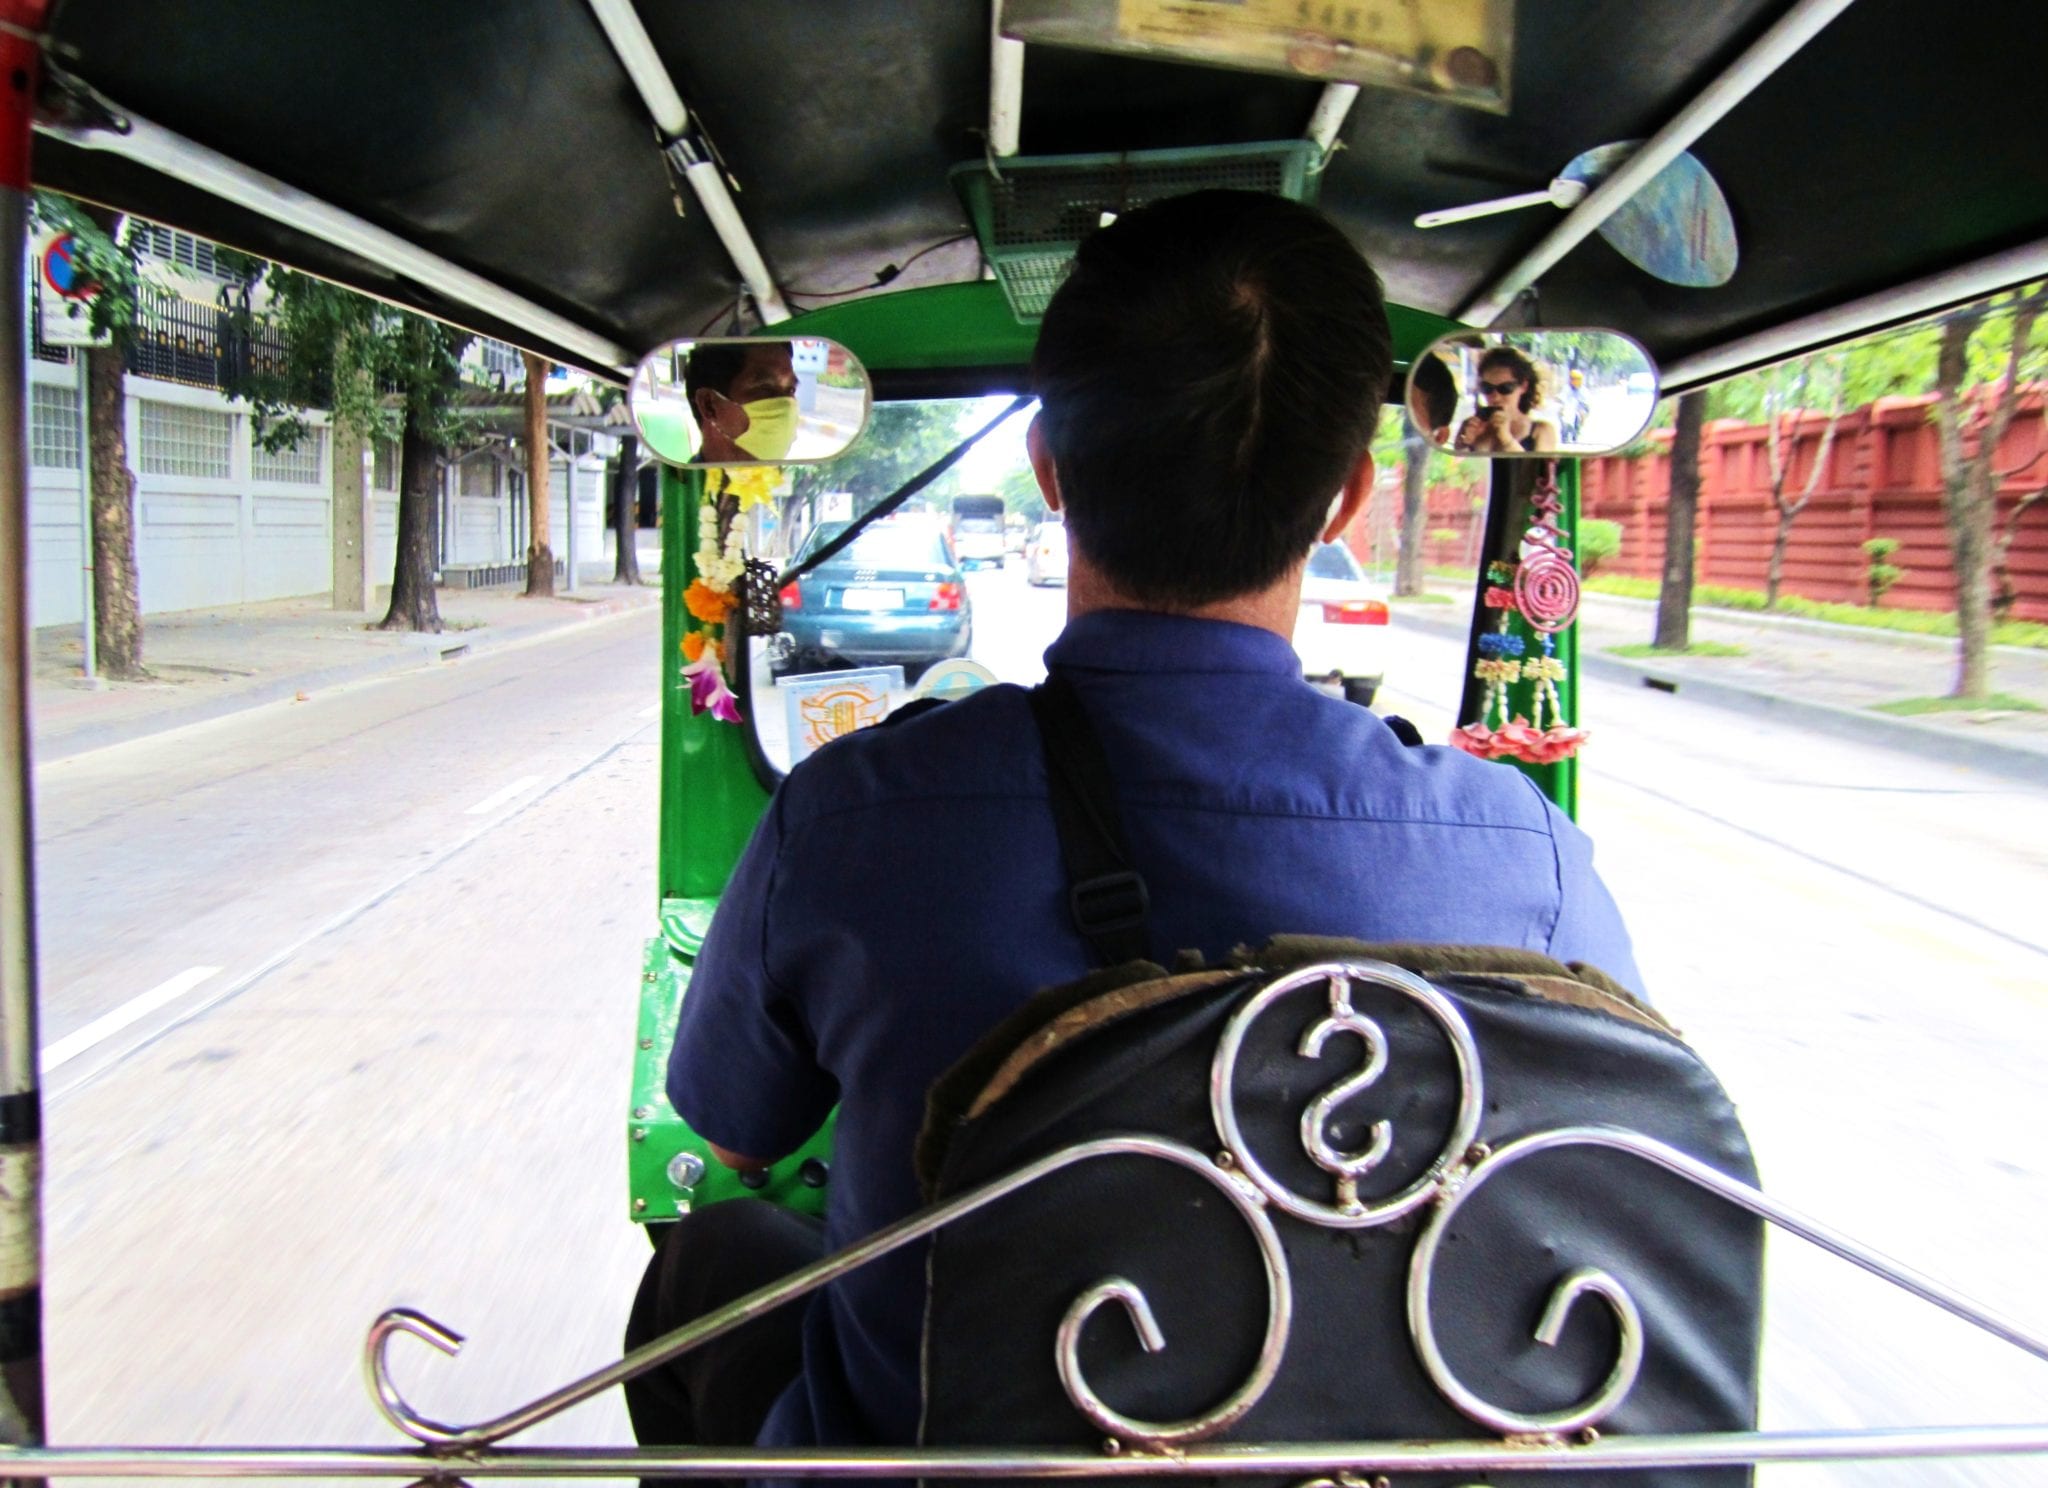 The view while riding in a tuk-tuk, the back of a man driving down the street.